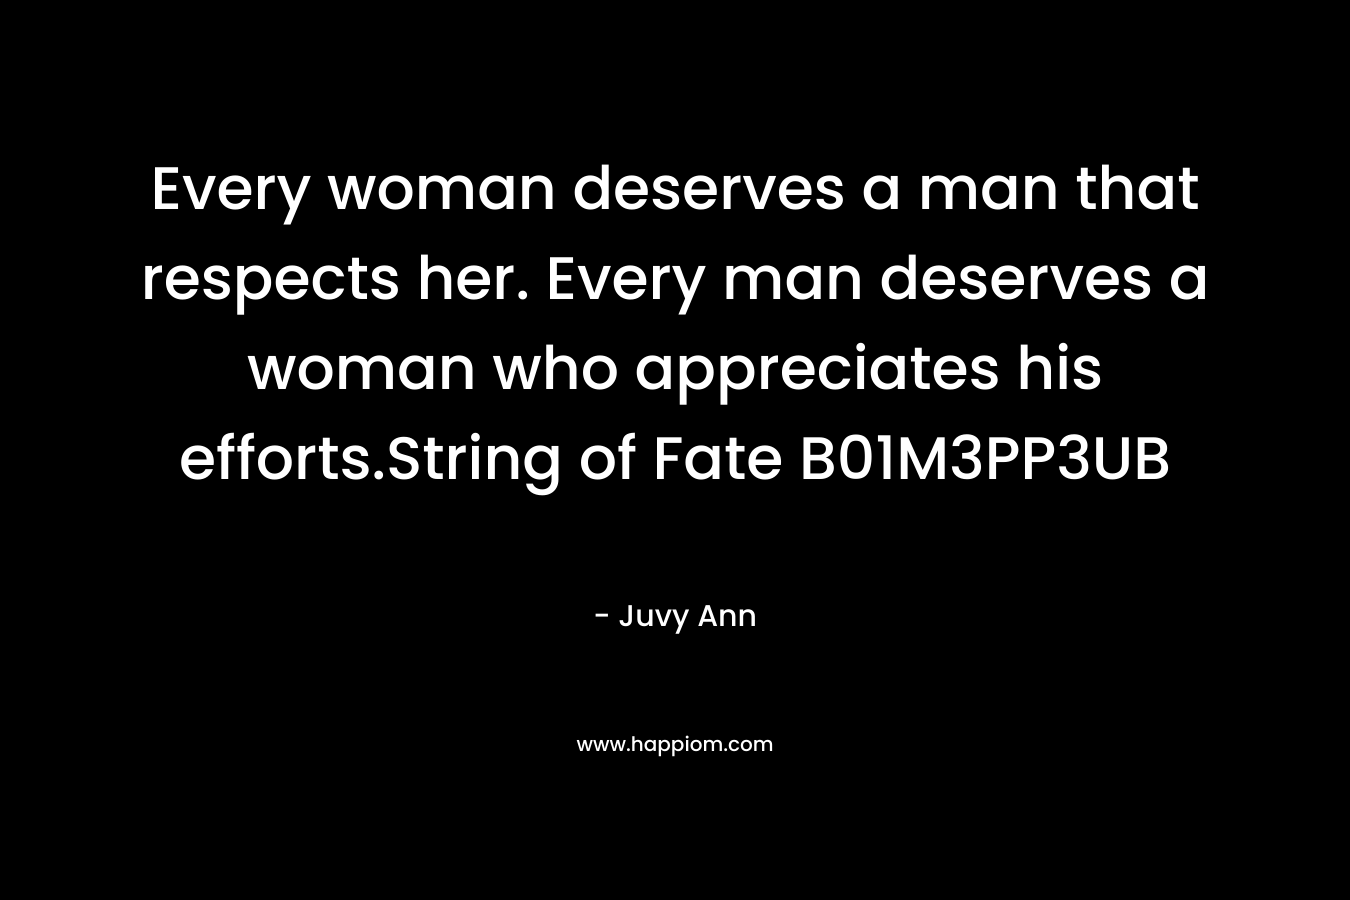 Every woman deserves a man that respects her. Every man deserves a woman who appreciates his efforts.String of Fate B01M3PP3UB – Juvy Ann